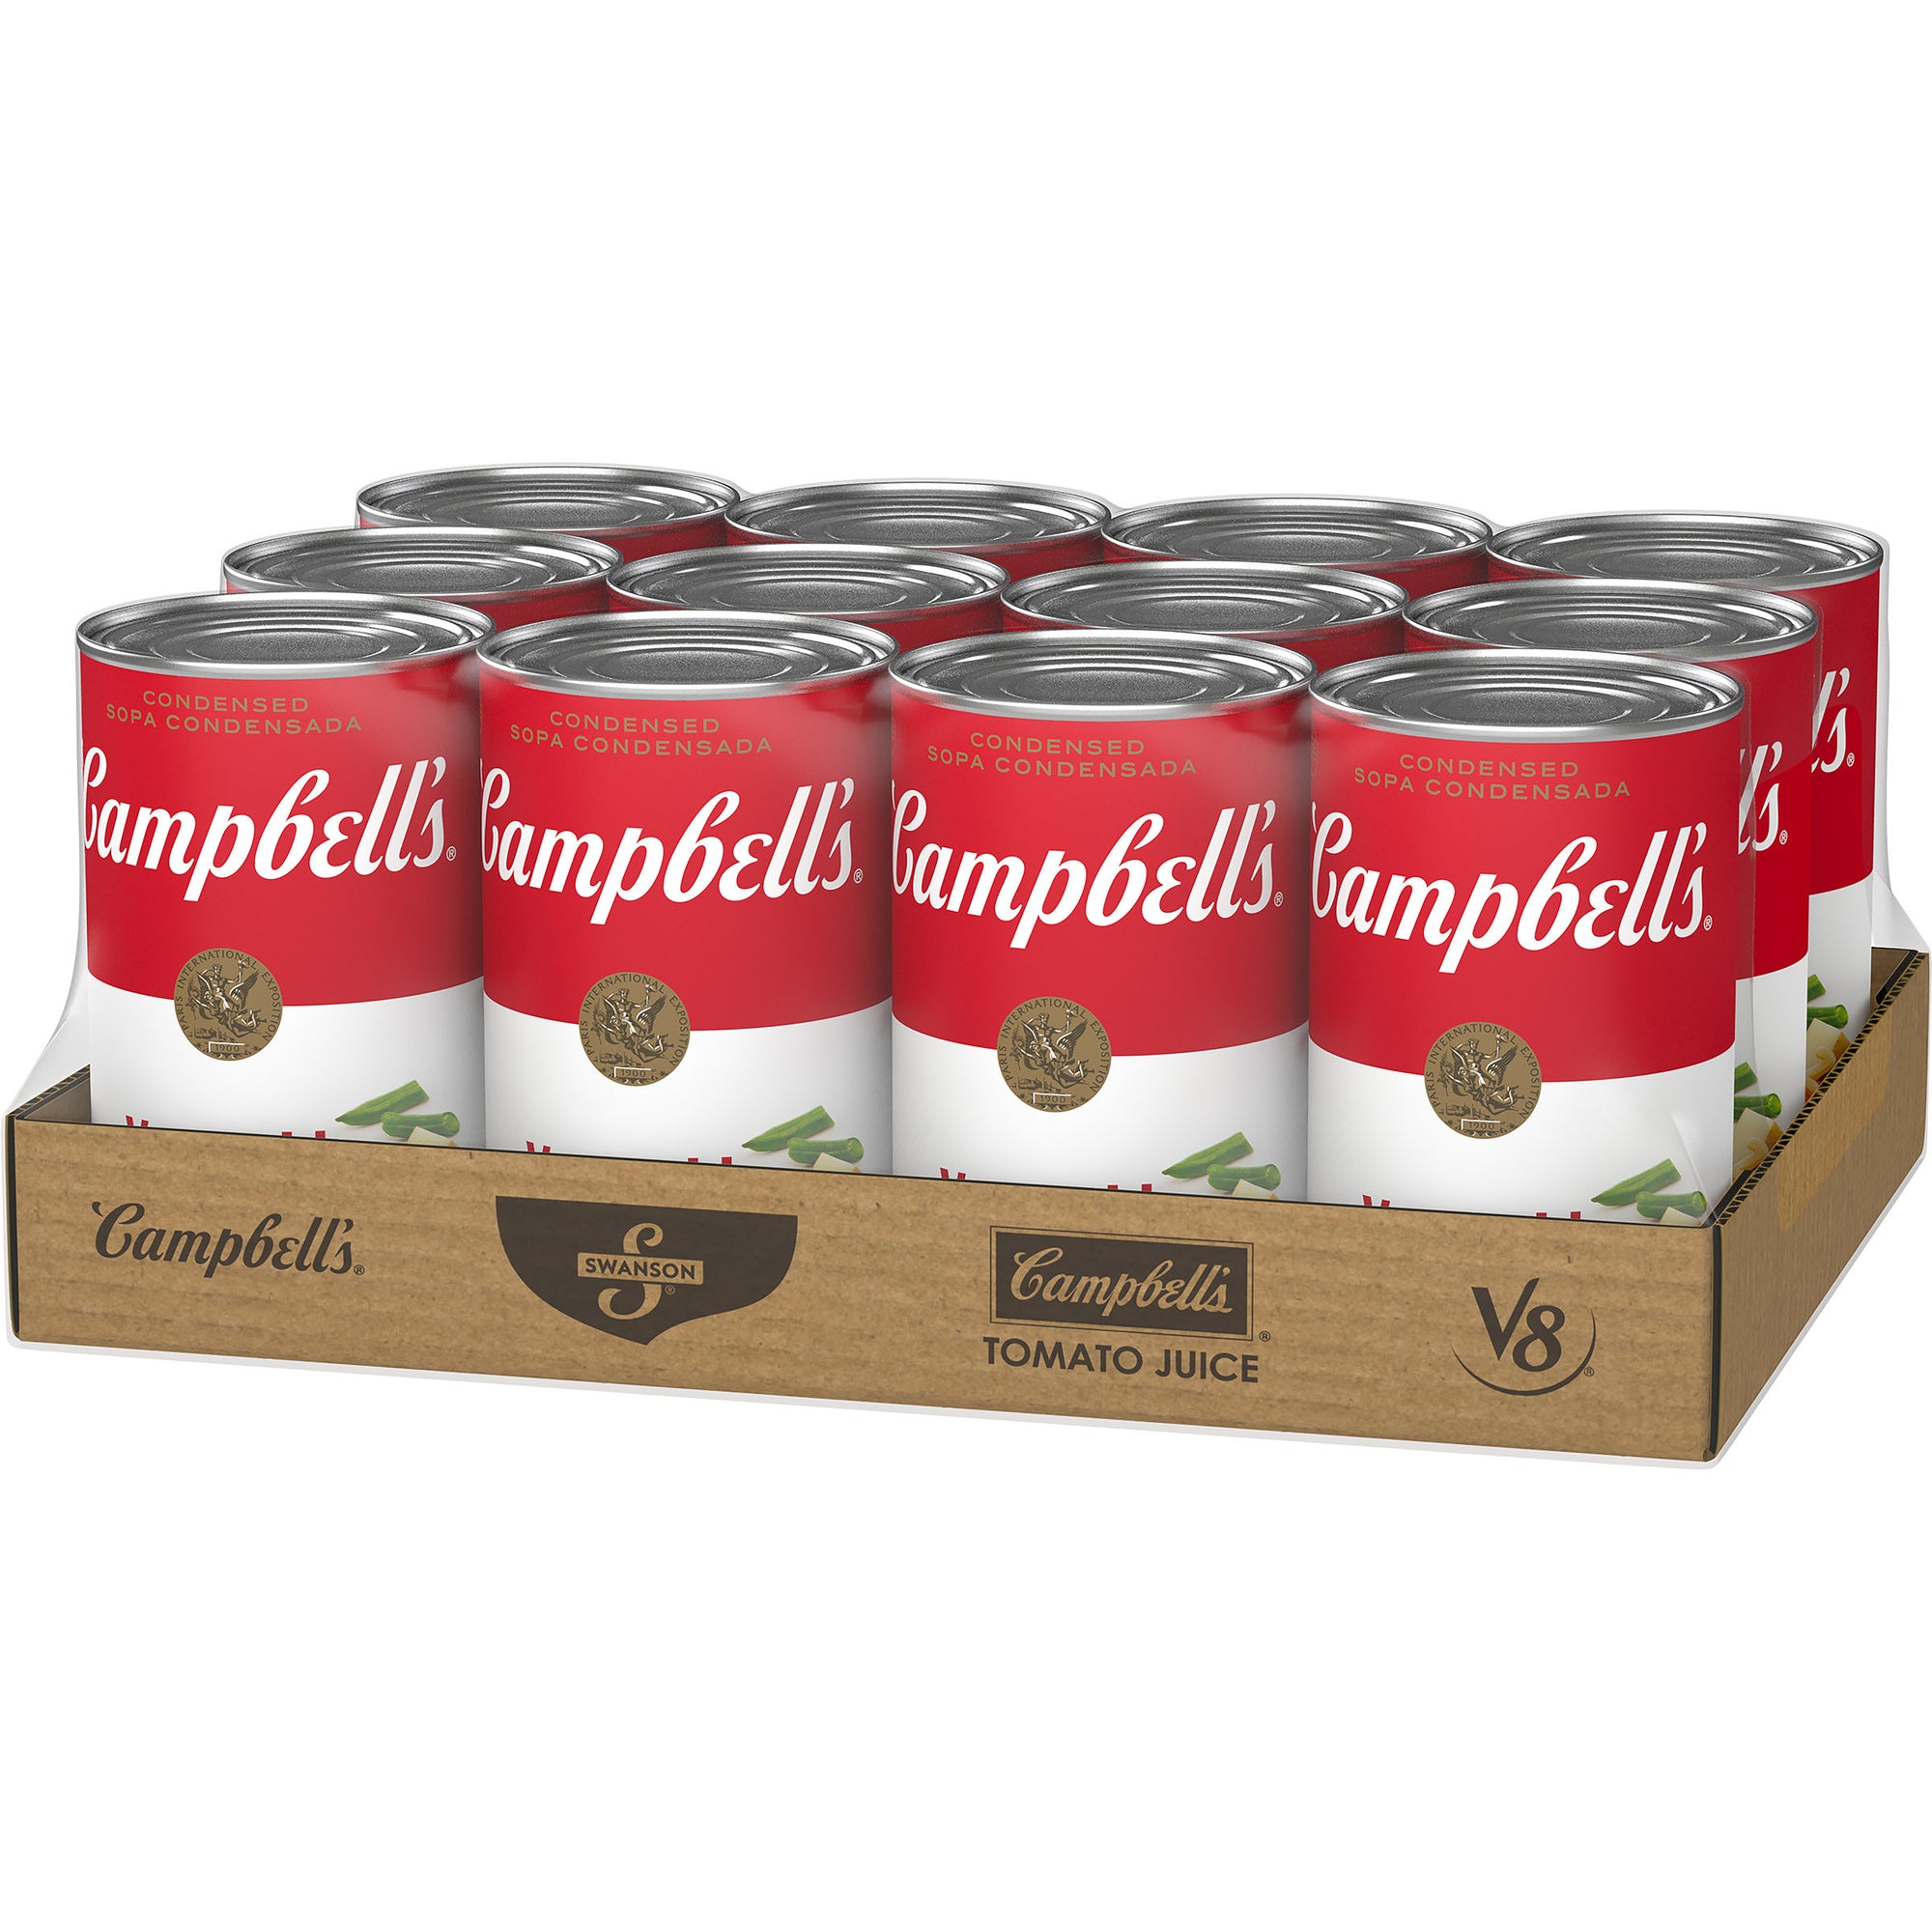 CAMPBELL'S CLASSIC VEGETABLE CONDENSED SHELF STABLE SOUP, 12 - 50 OZ